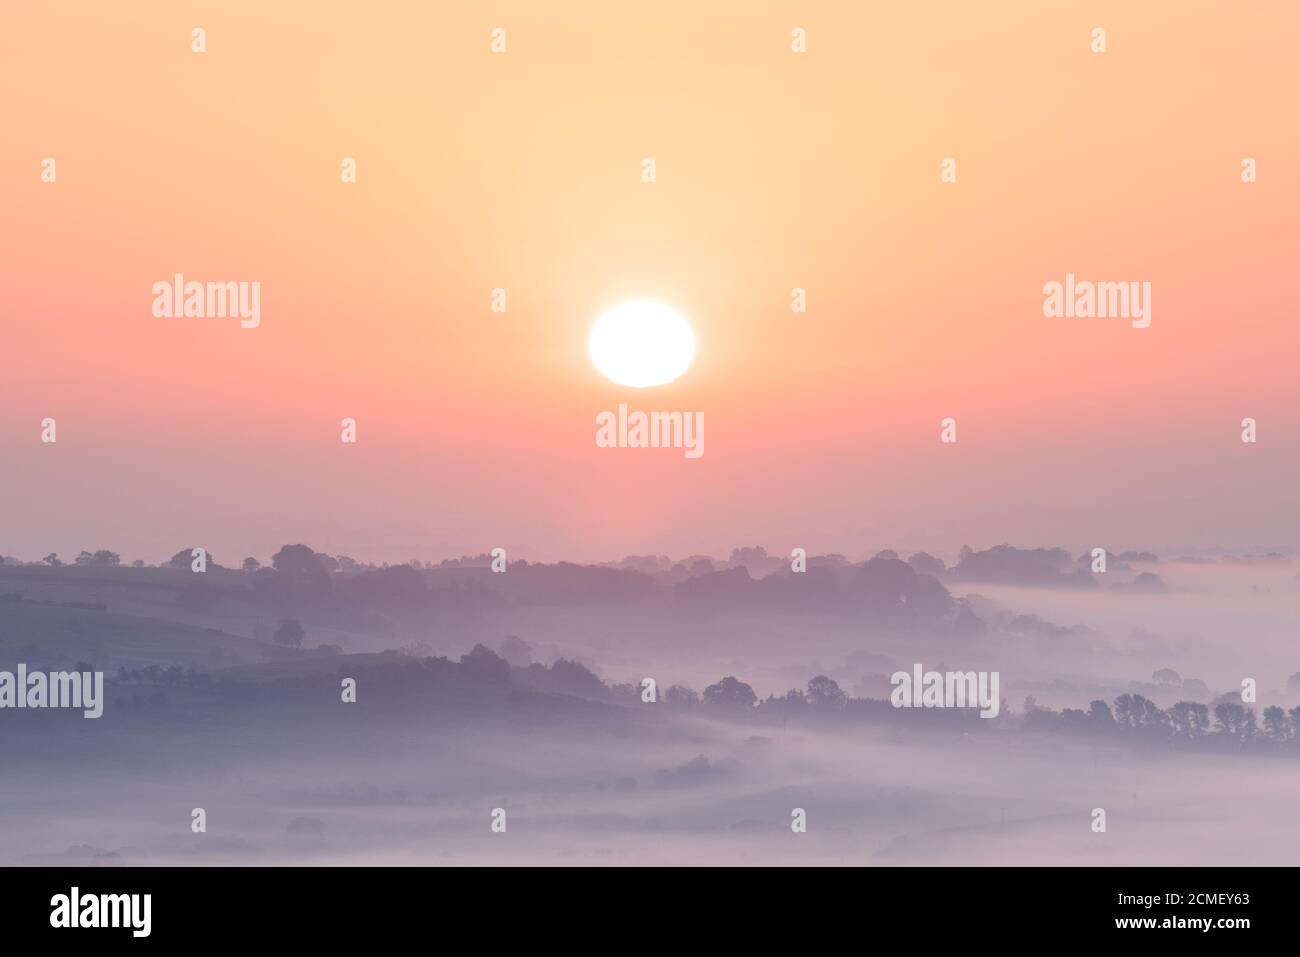 The rising sun casts pastel tones across the fog shrouded landscape of Lower Wharfedale, with tree lined hills peeking through the mist. Stock Photo